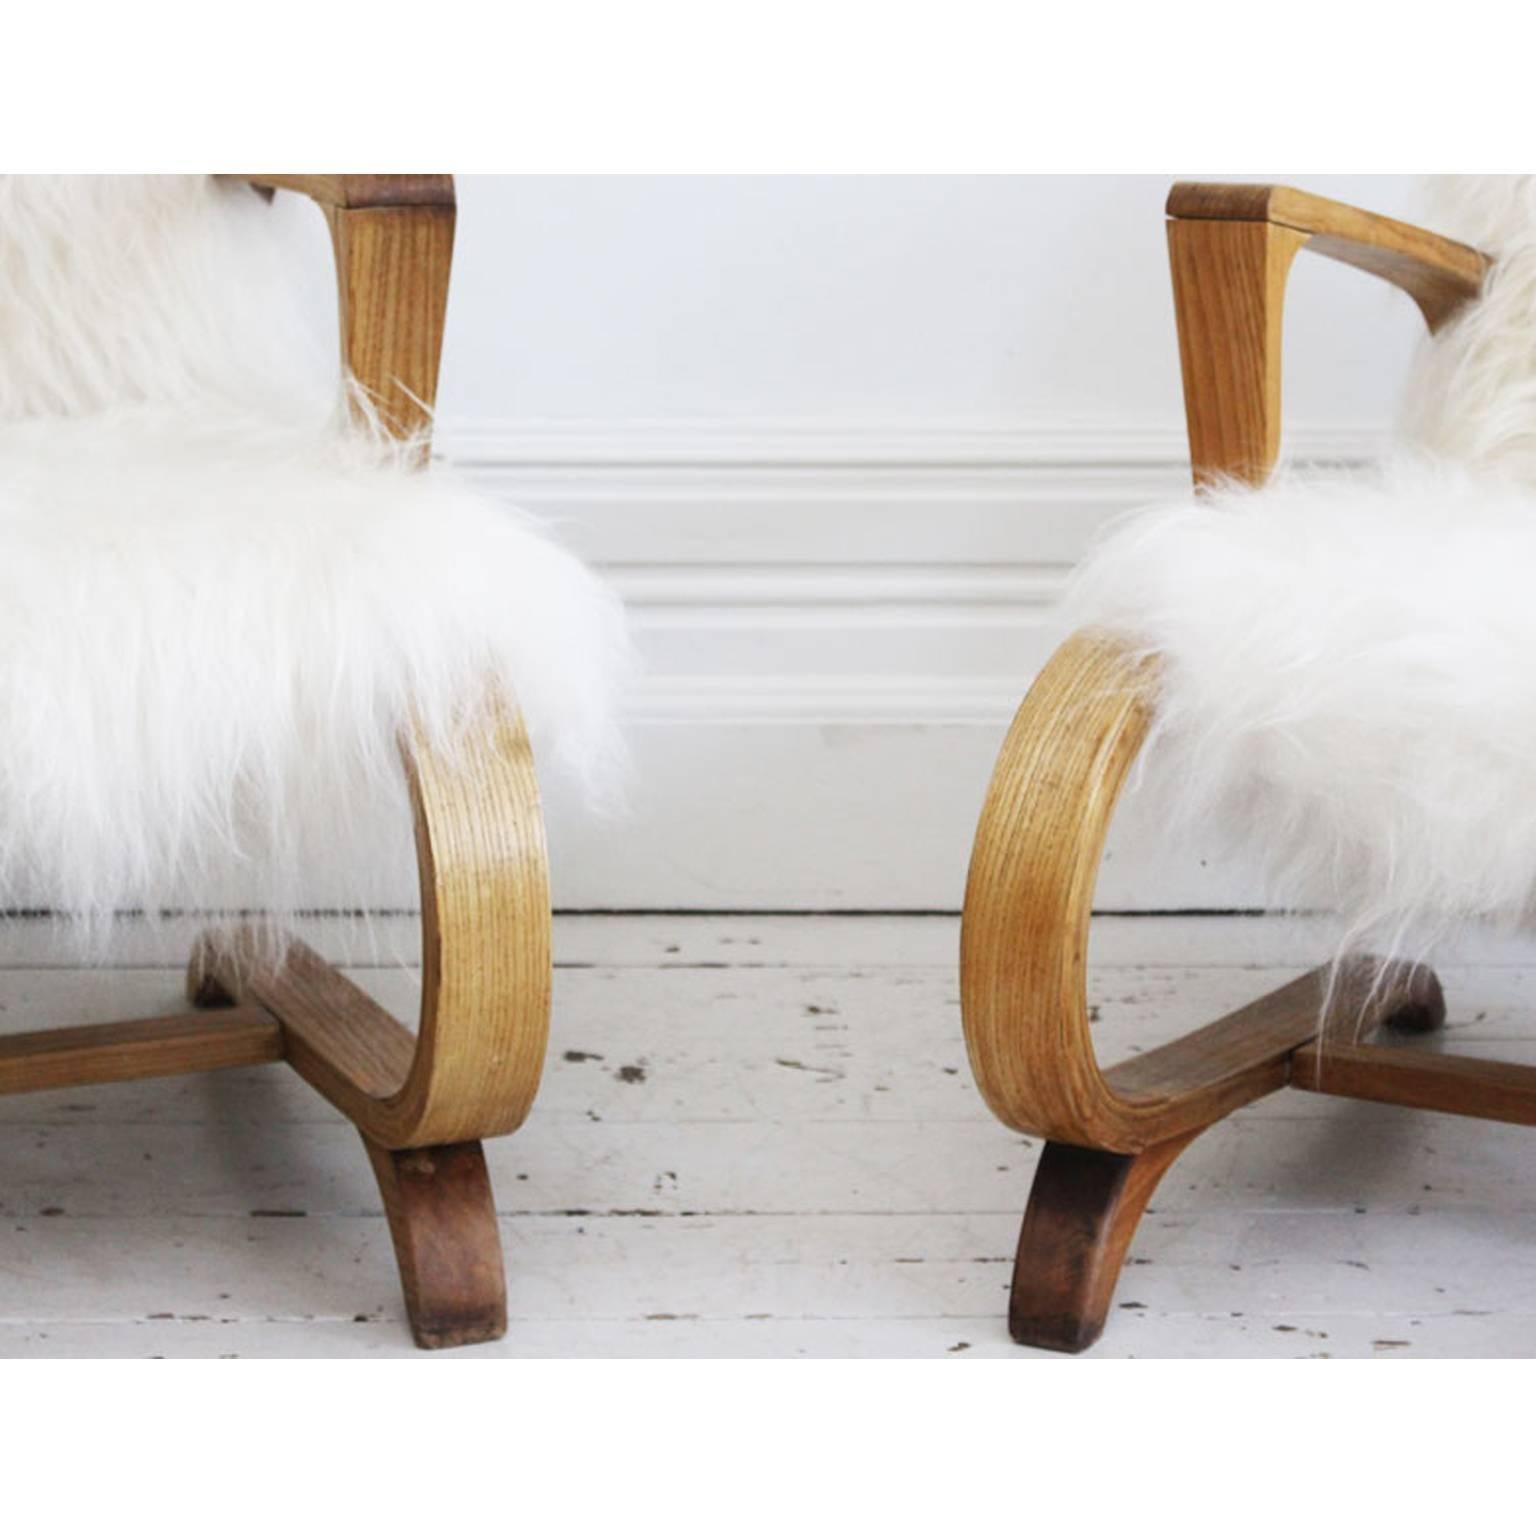 Mid-20th Century Pair of 1950s Cantilever French Armchairs Covered in Icelandic Sheepskin